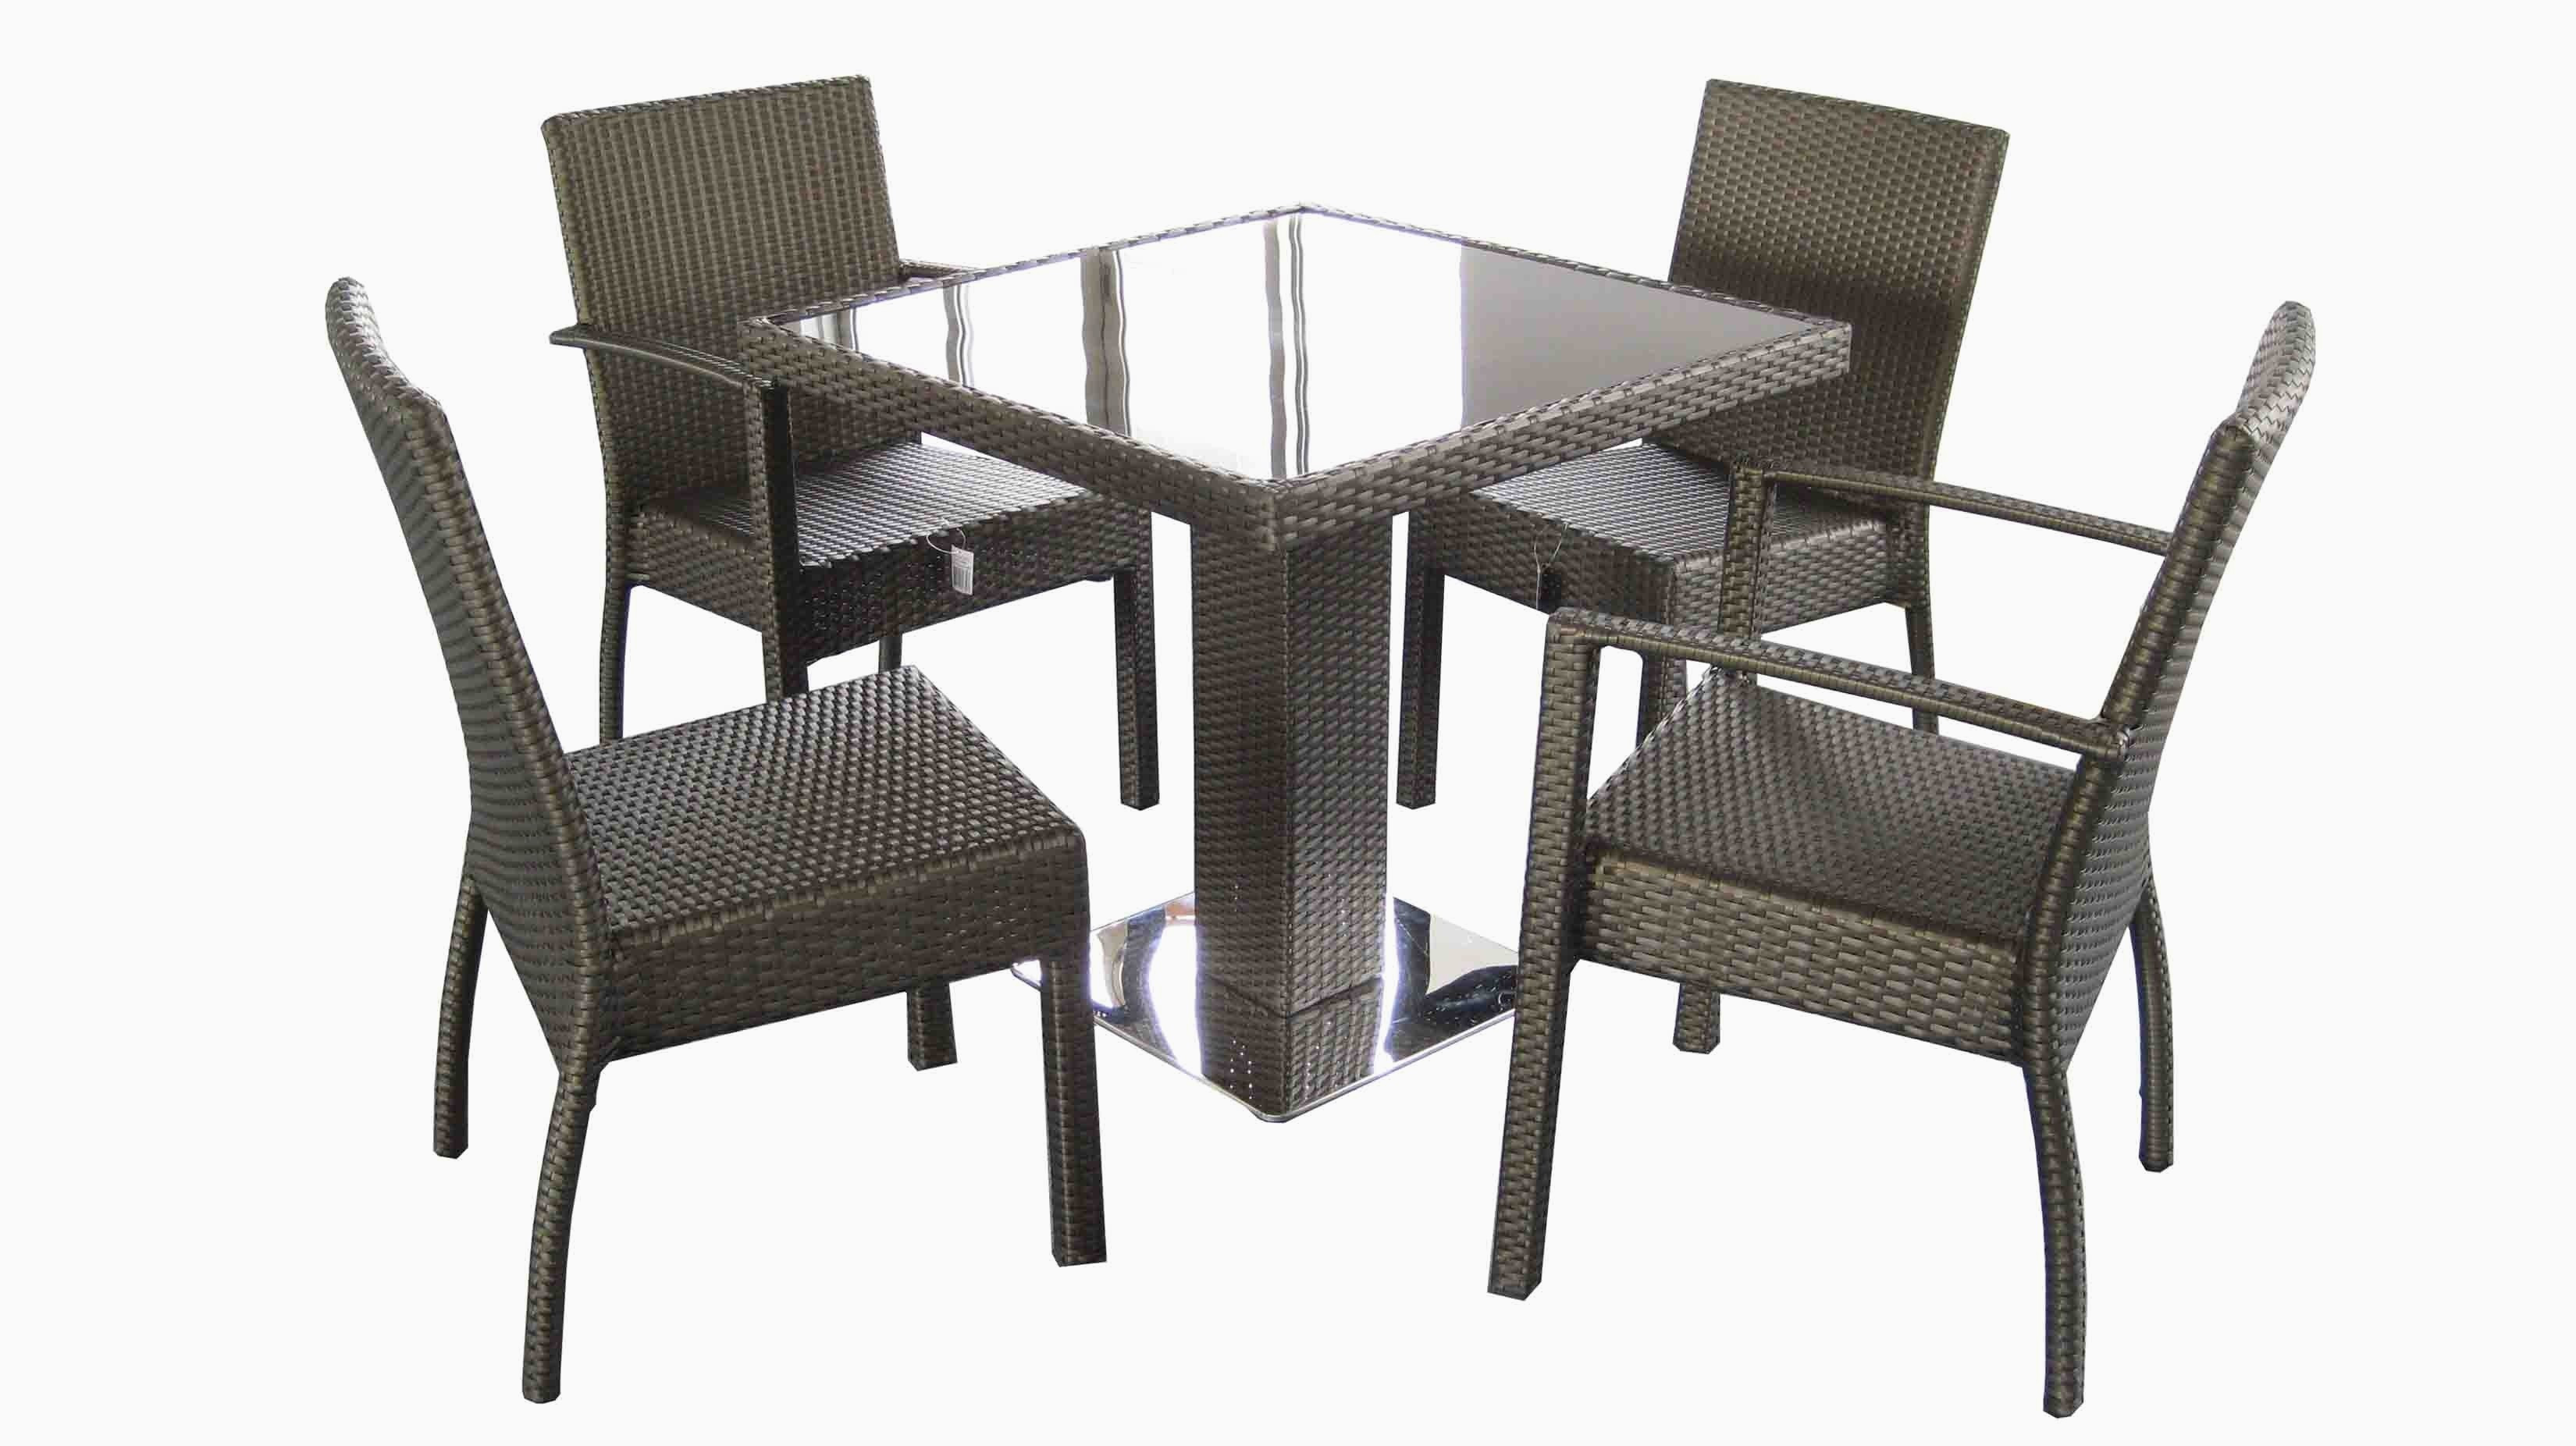 21 Great Square Glass Vases Bulk 2024 free download square glass vases bulk of square glass dining table detail chair best outdoor dining sets for square glass dining table detail chair best outdoor dining sets unique outdoor patio table sets